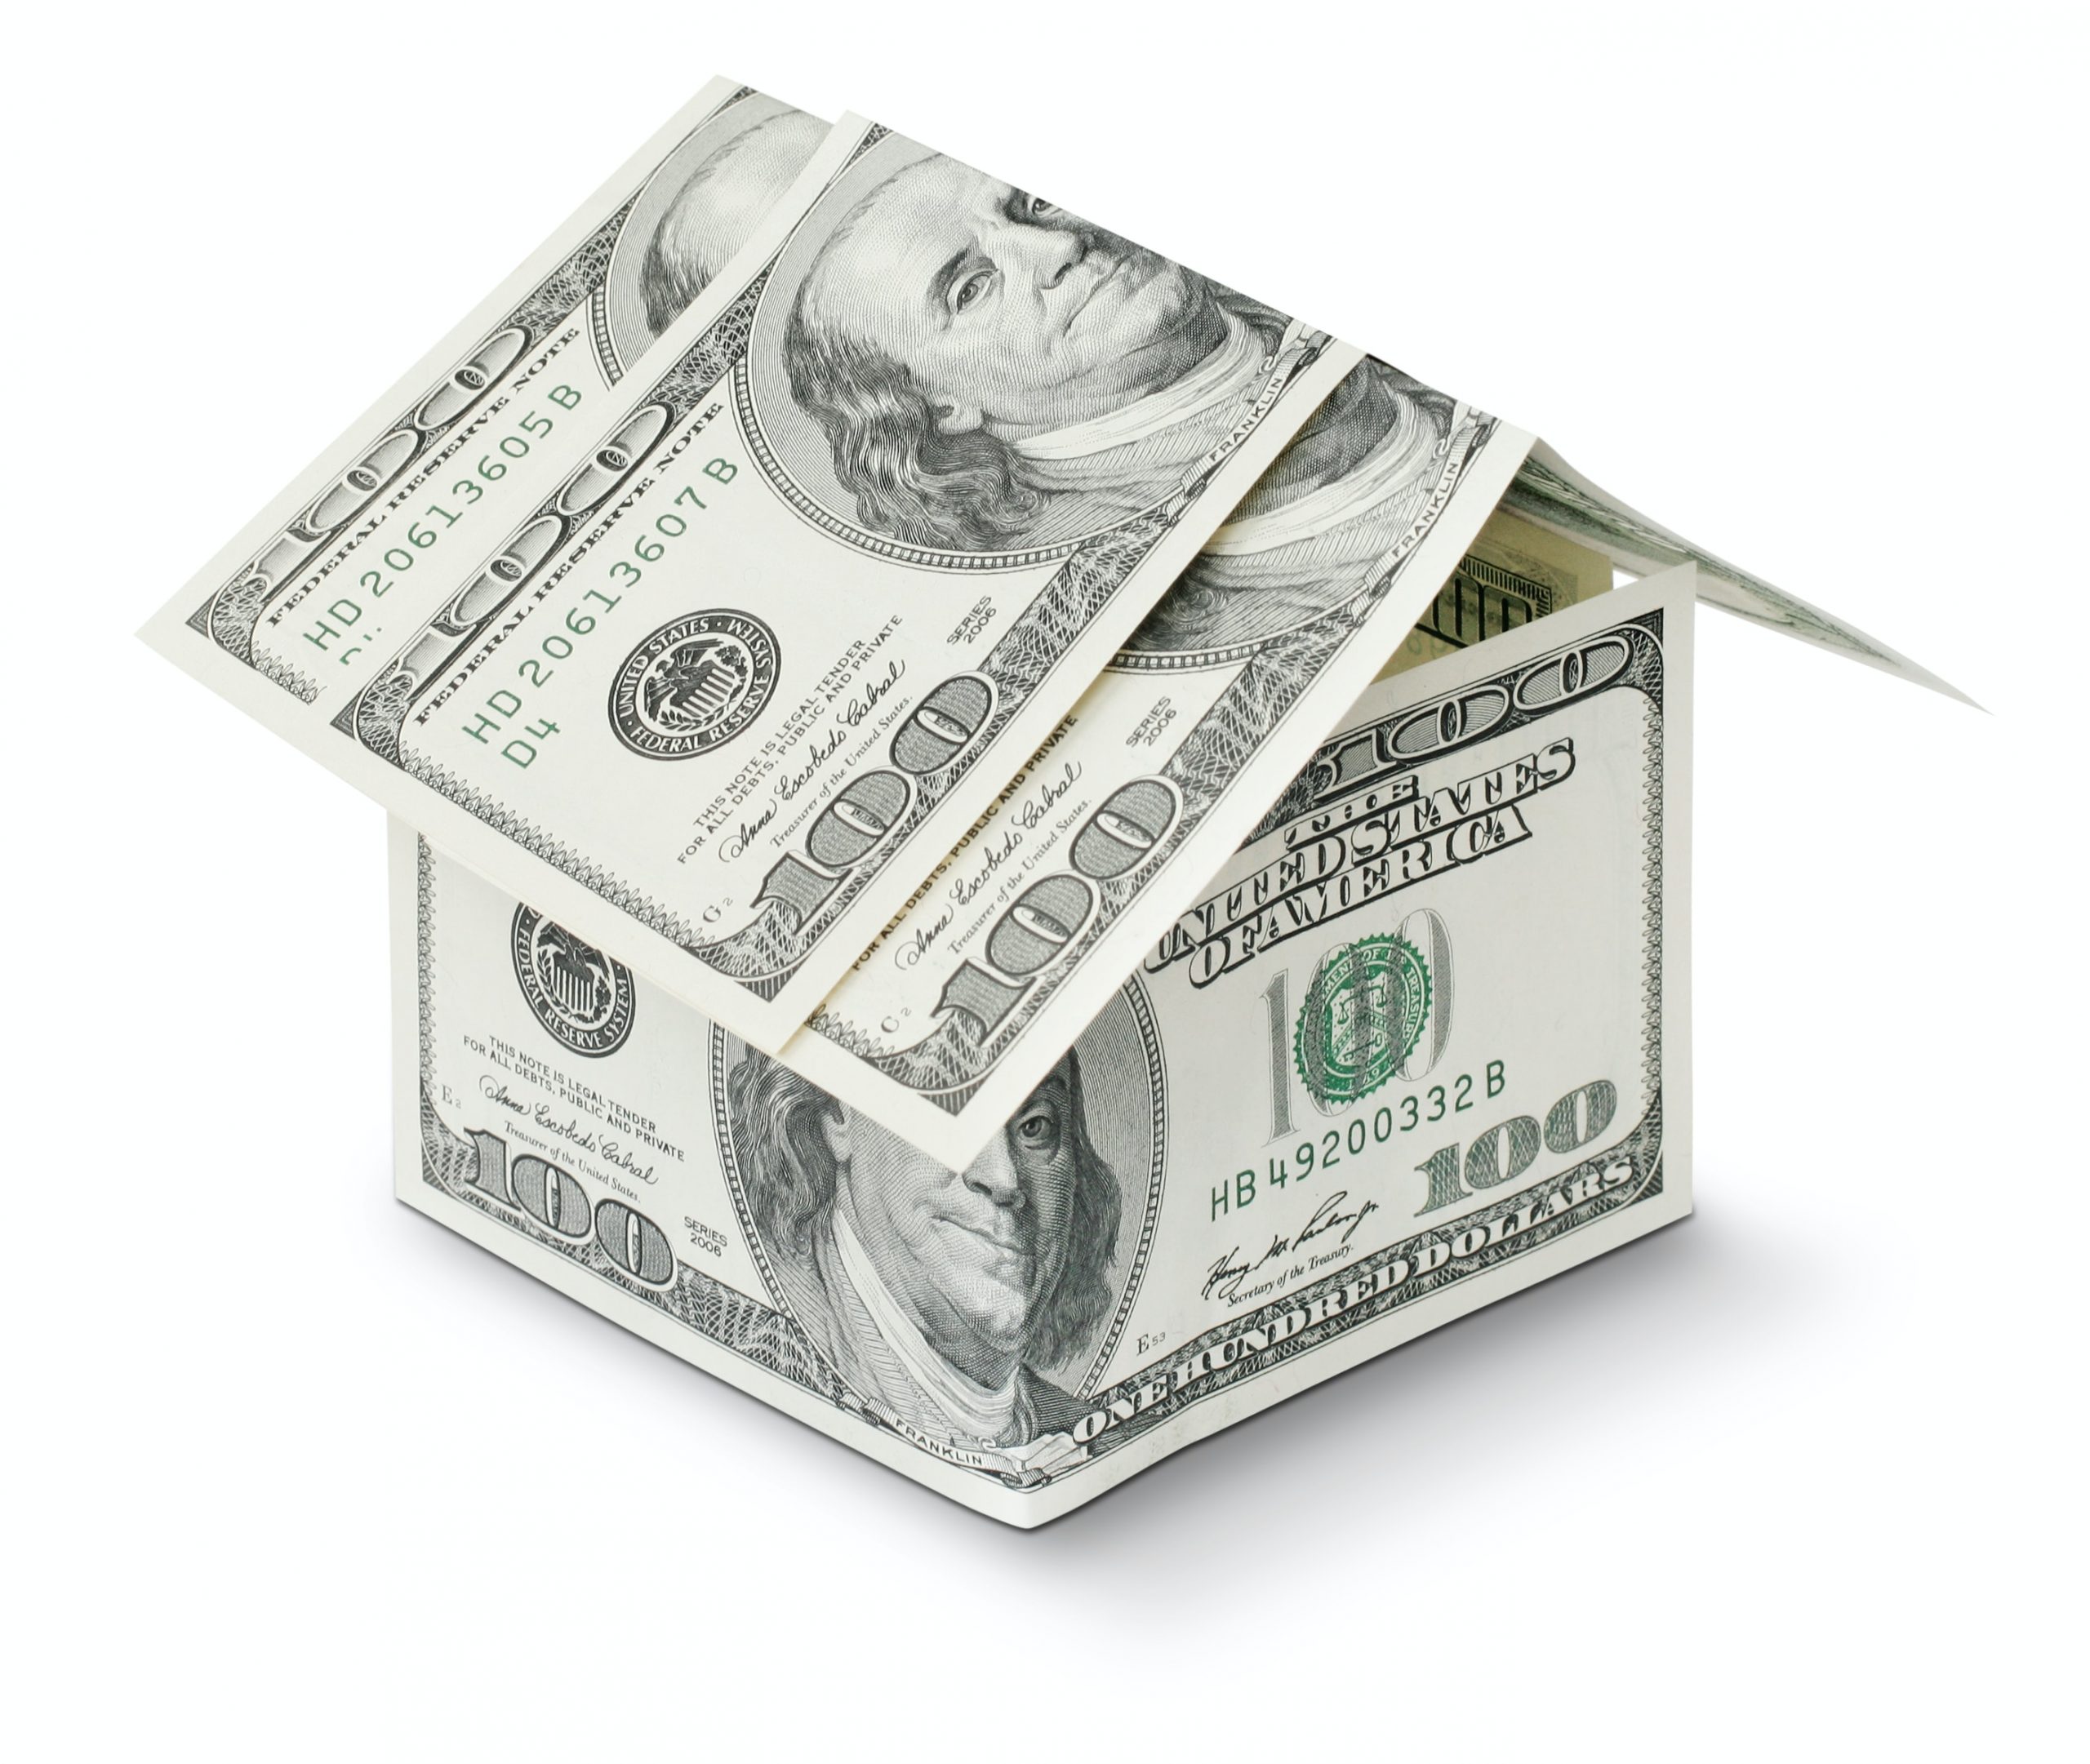 Rising home prices, home made out of $100 bills